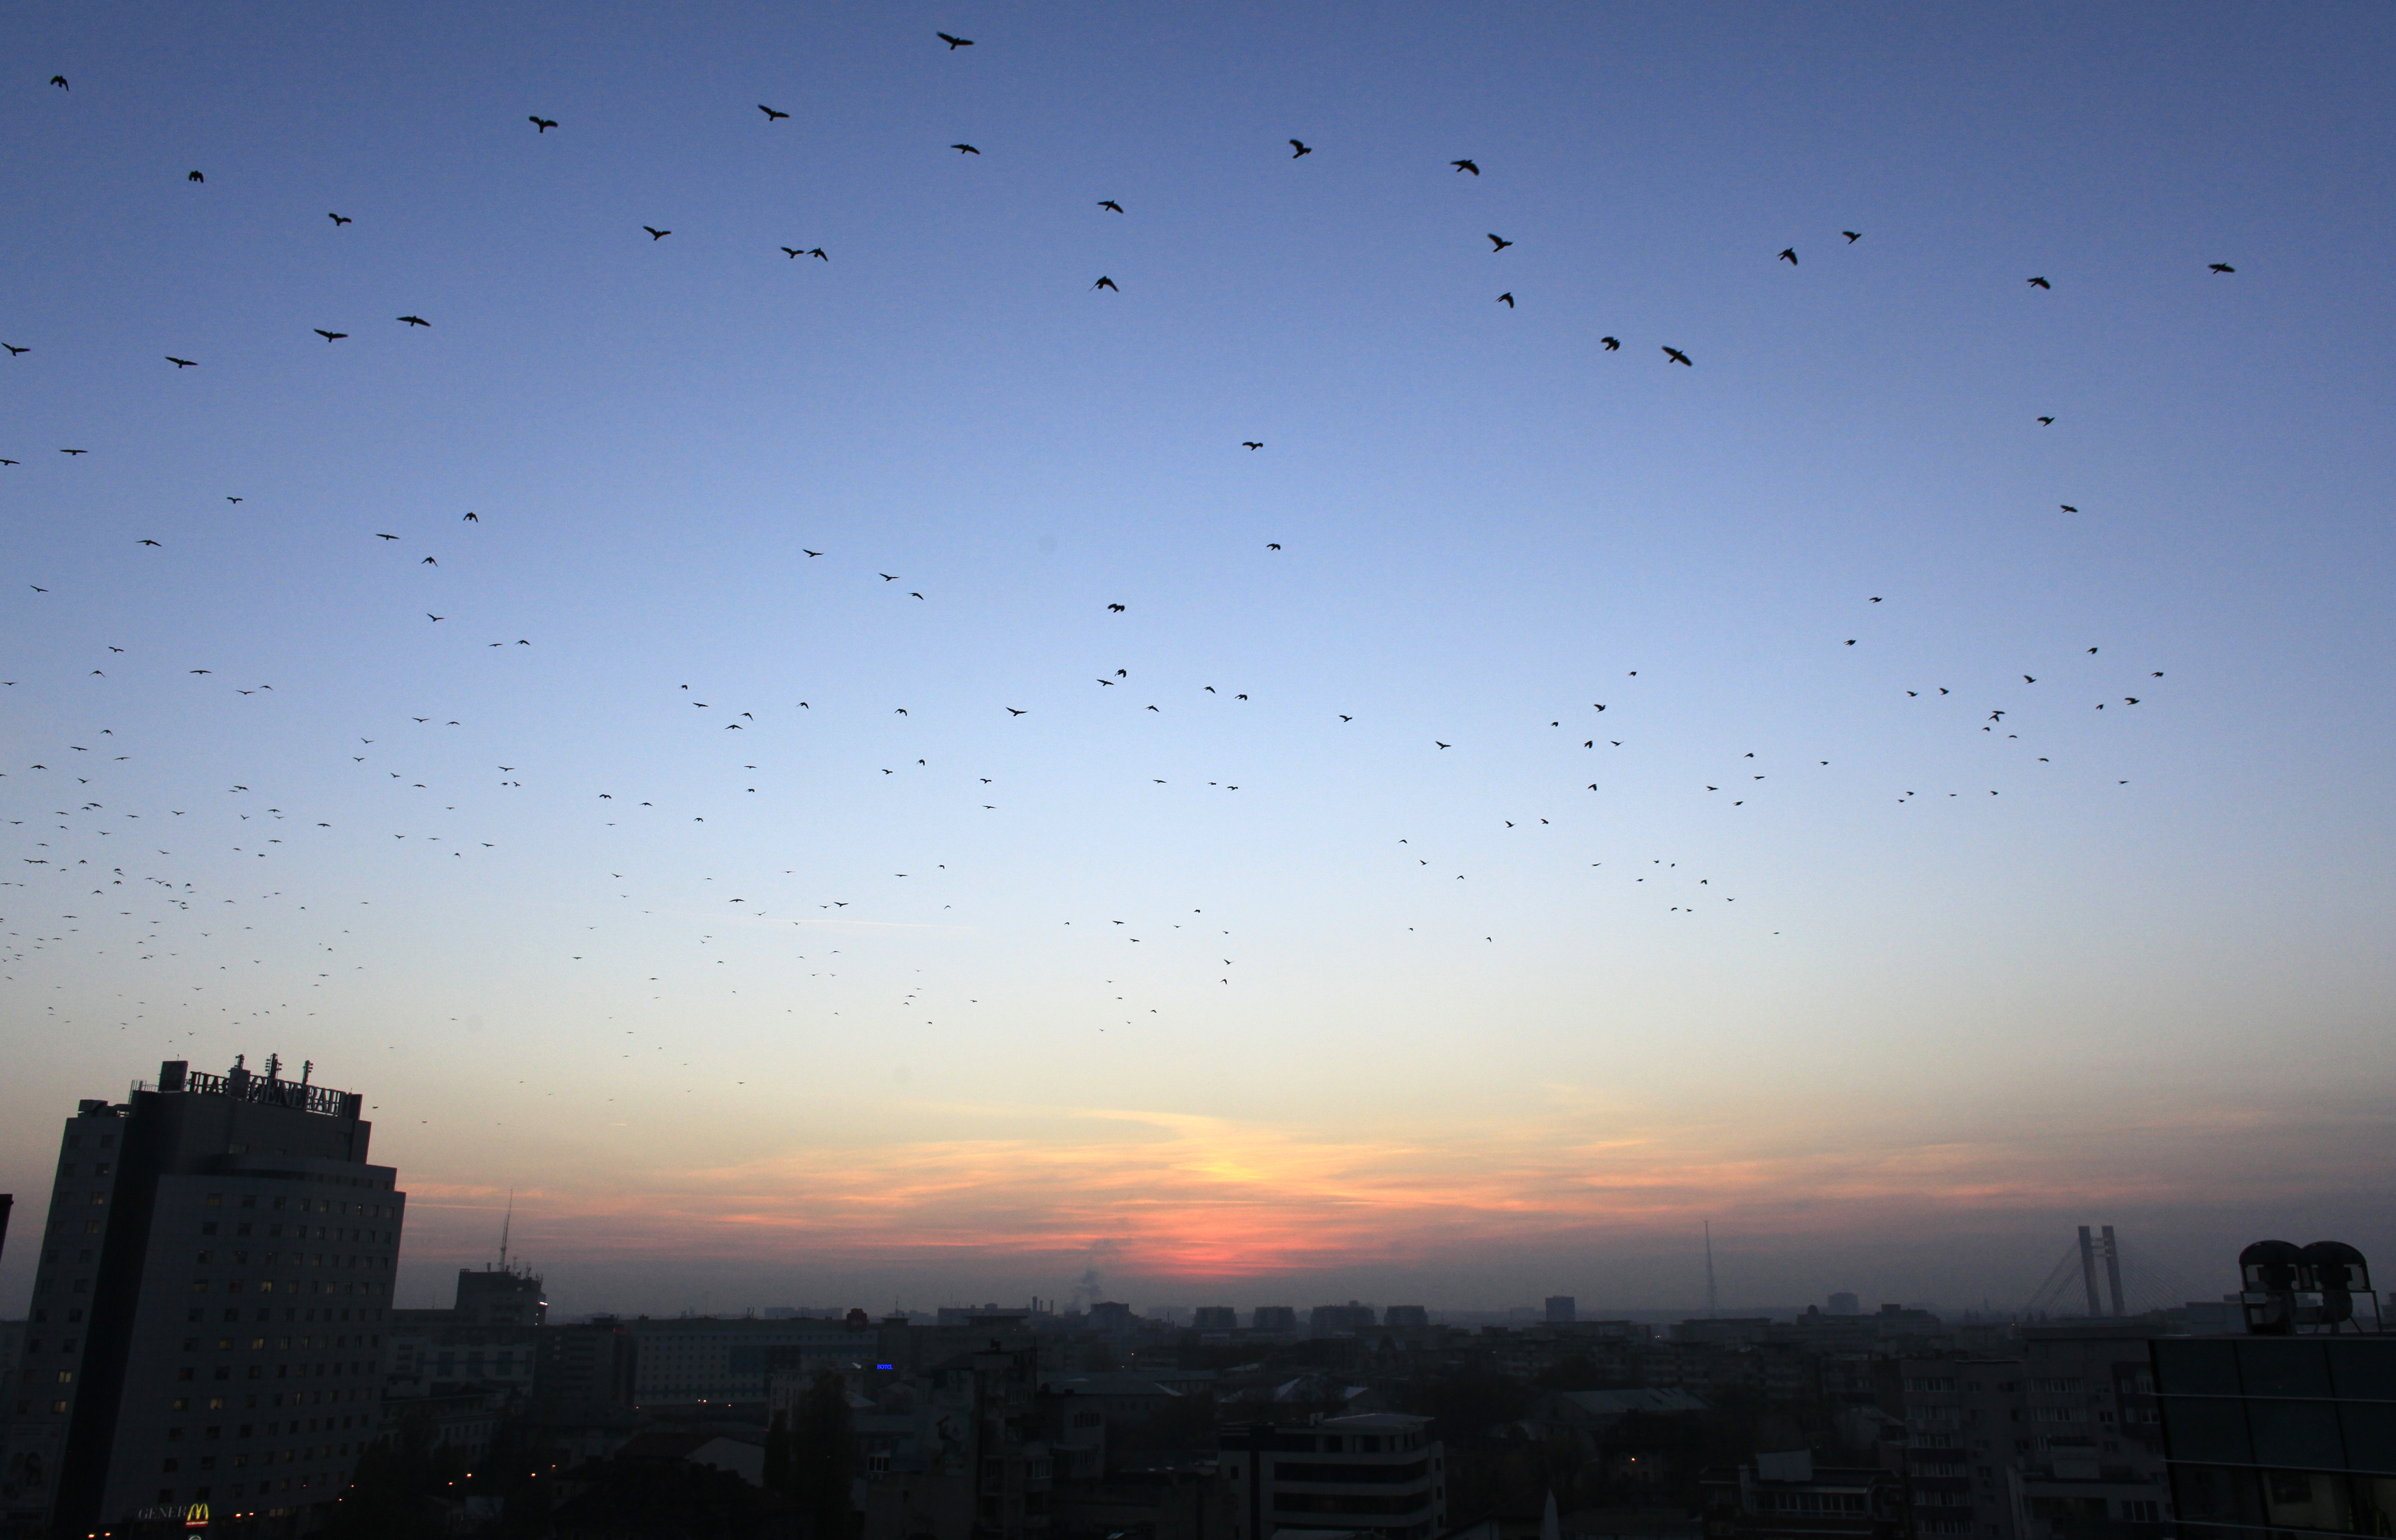 Thousands of crows fly at dusk over the city skyline in Bucharest